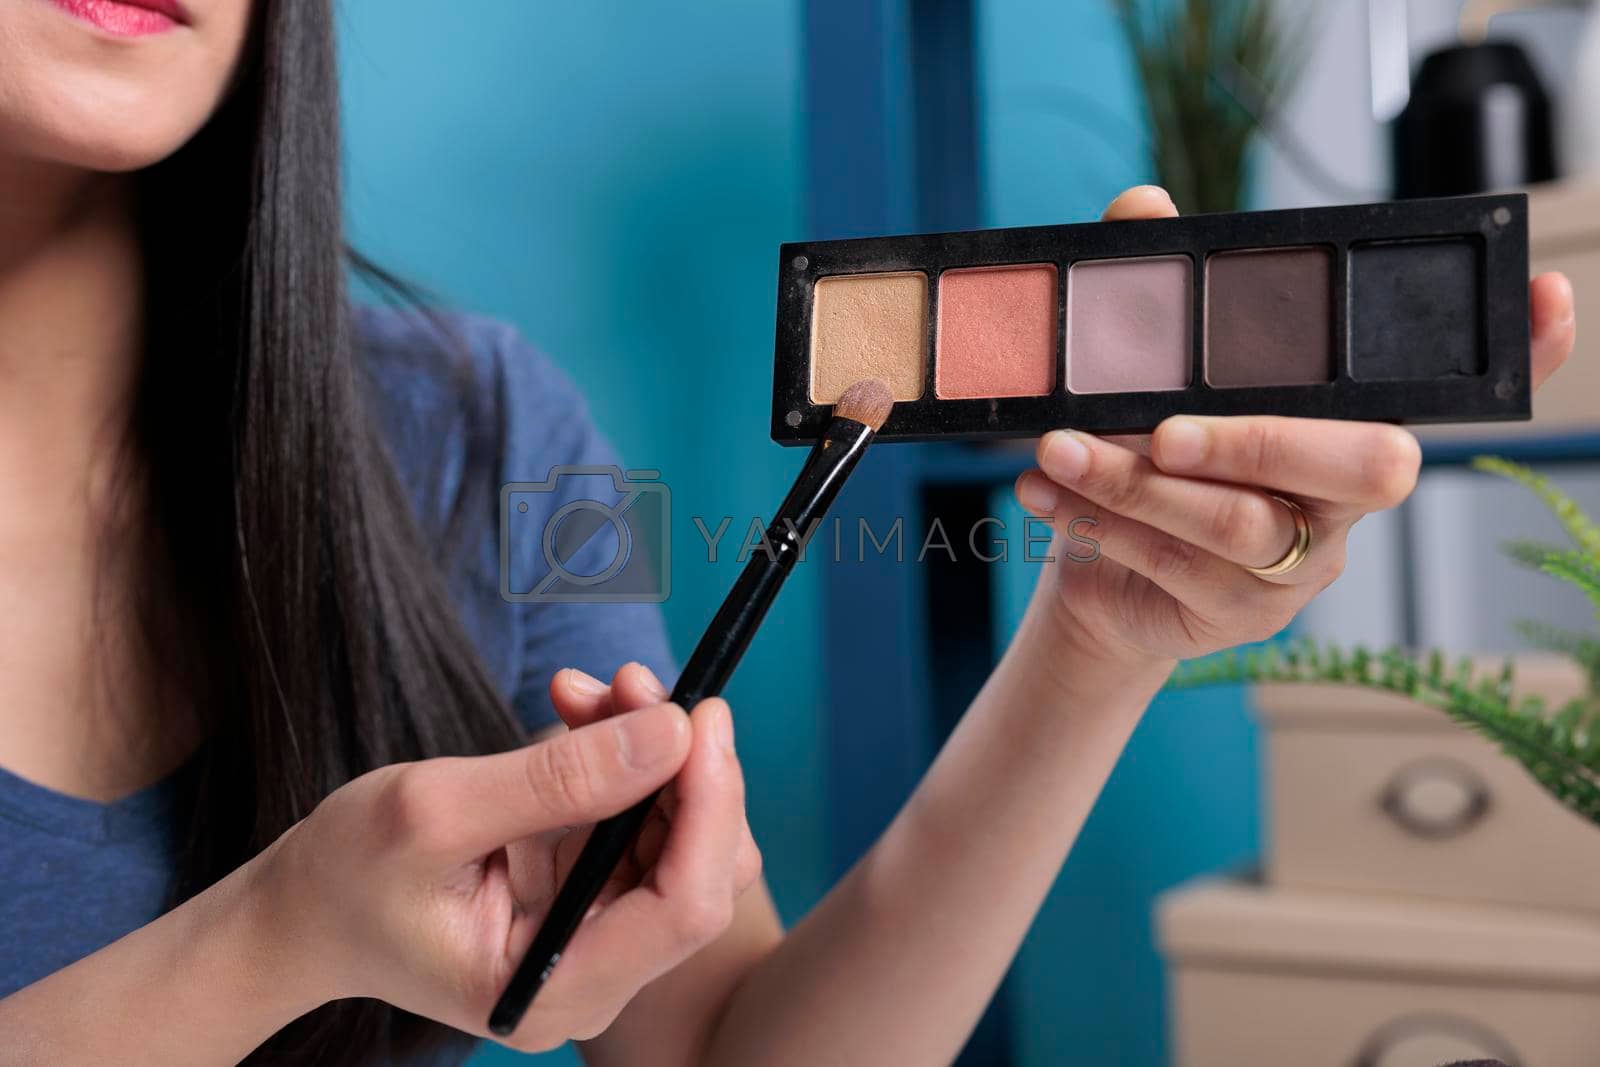 Beauty guru holding cosmetic palette showing at camera while filming make up tutorial reviewing product for vlogging channel in studio. Social media influencer recording cosmetology podcast. Close up